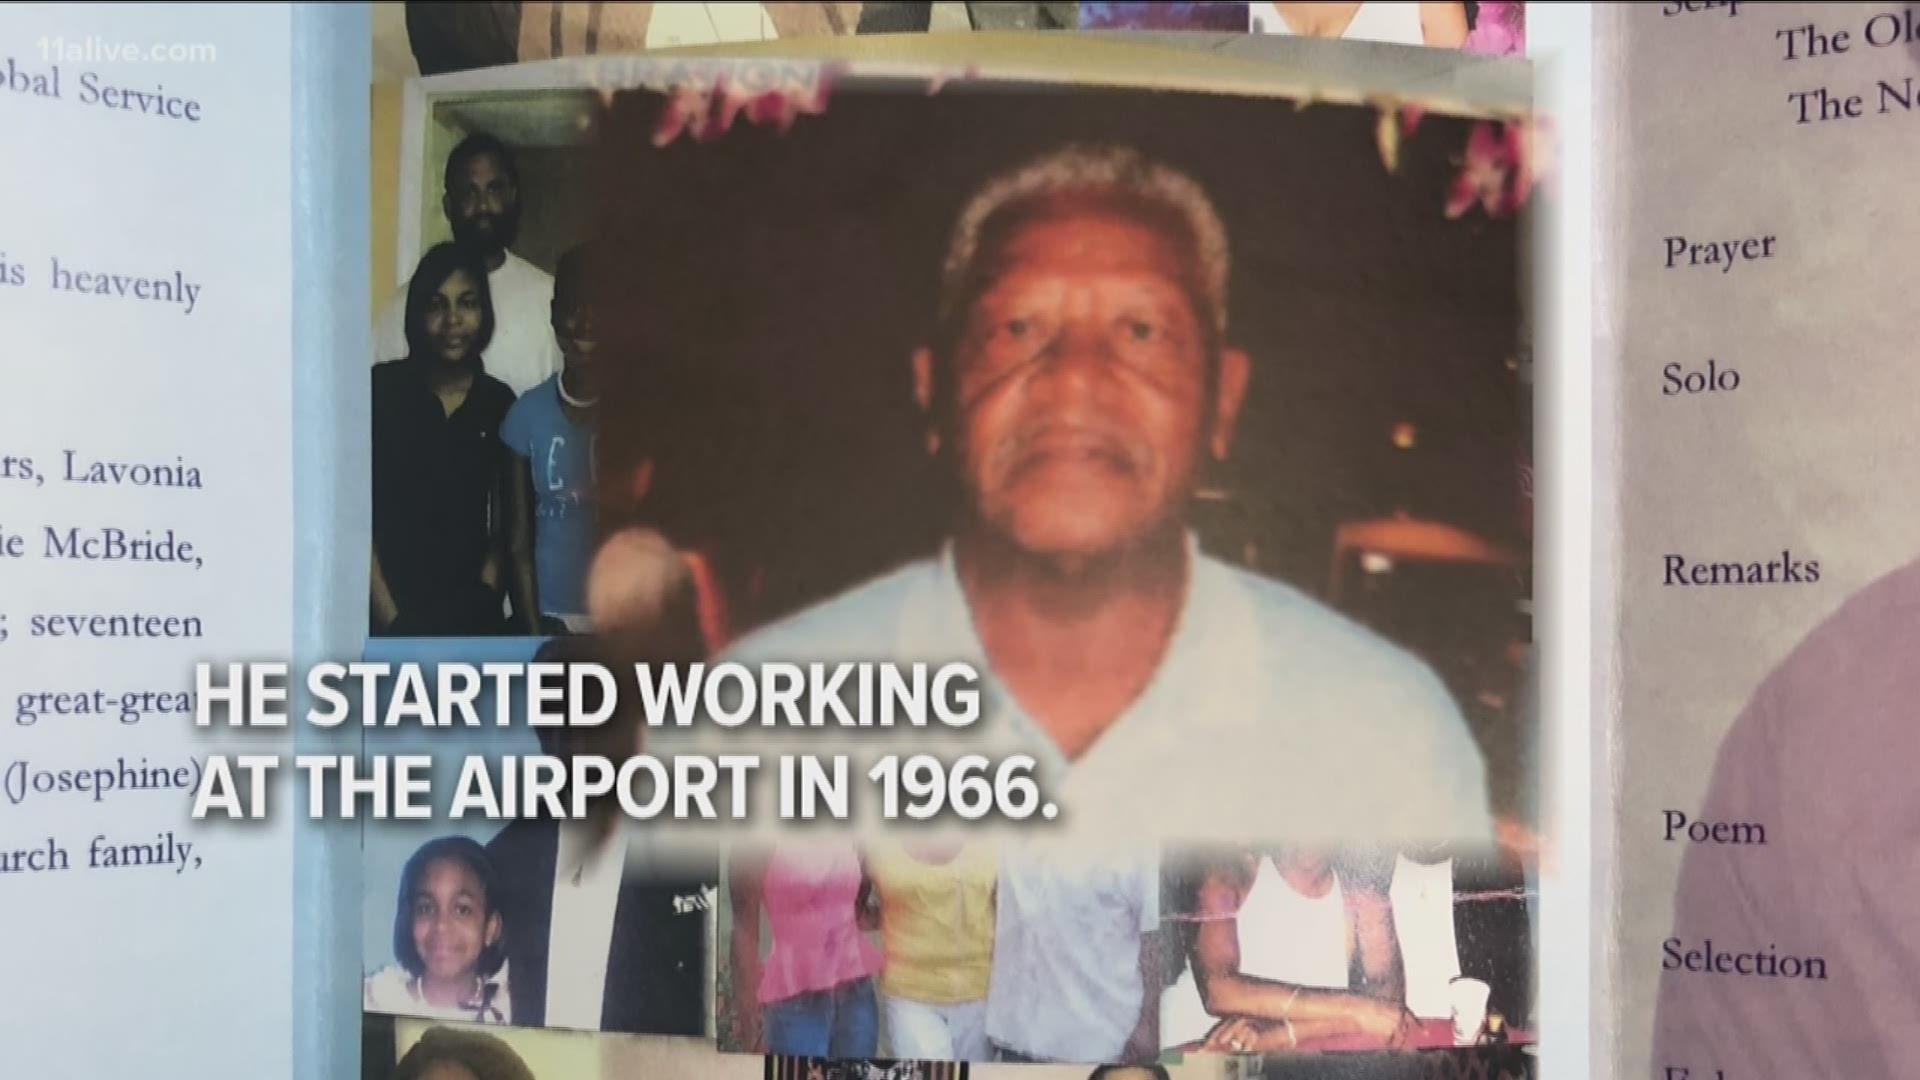 The longtime employee worked for Delta airlines since the mid 1960s.